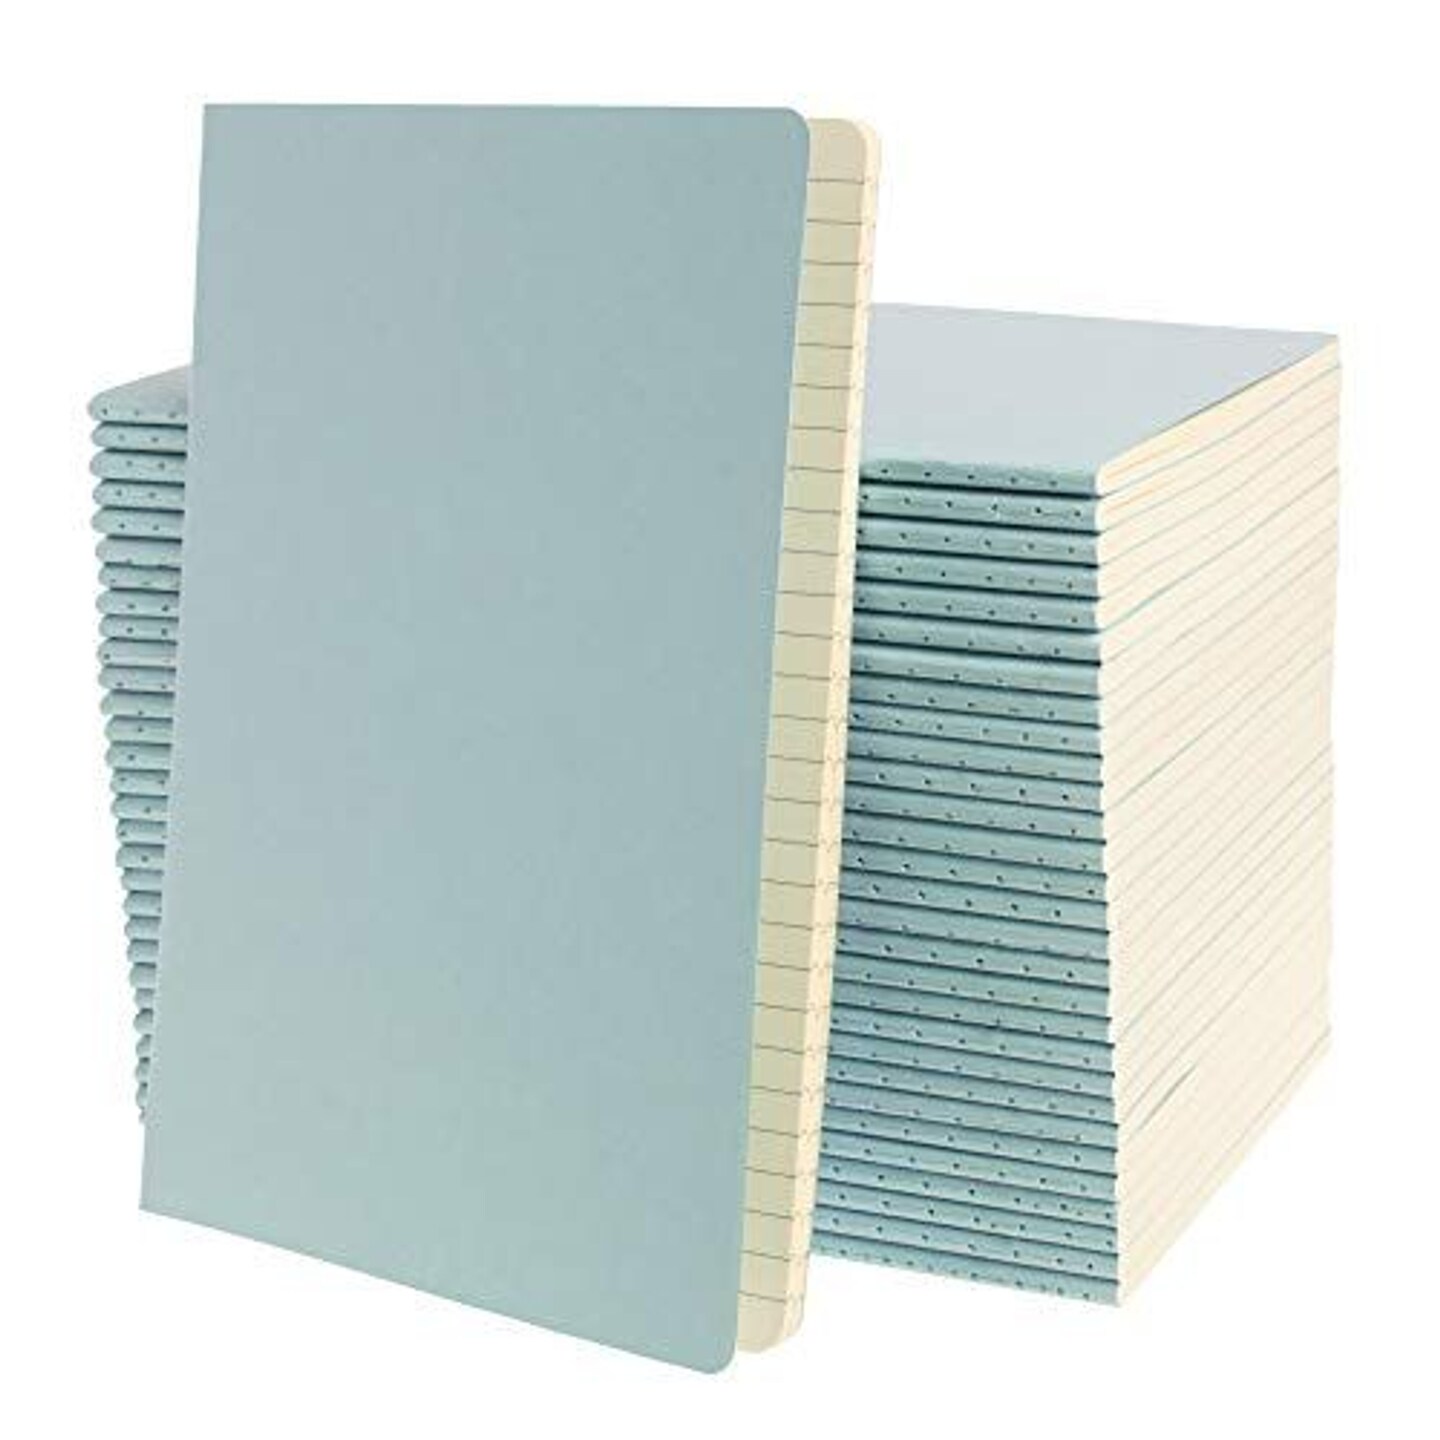 Simply Genius A5 Notebooks for Work, Travel, Business, School &#x26; More - College Ruled Notebook - Softcover Journals for Women &#x26; Men - Lined Note Books with 92 pages, 5.5&#x22; x 8.3&#x22; (Light Blue, 30 pack)